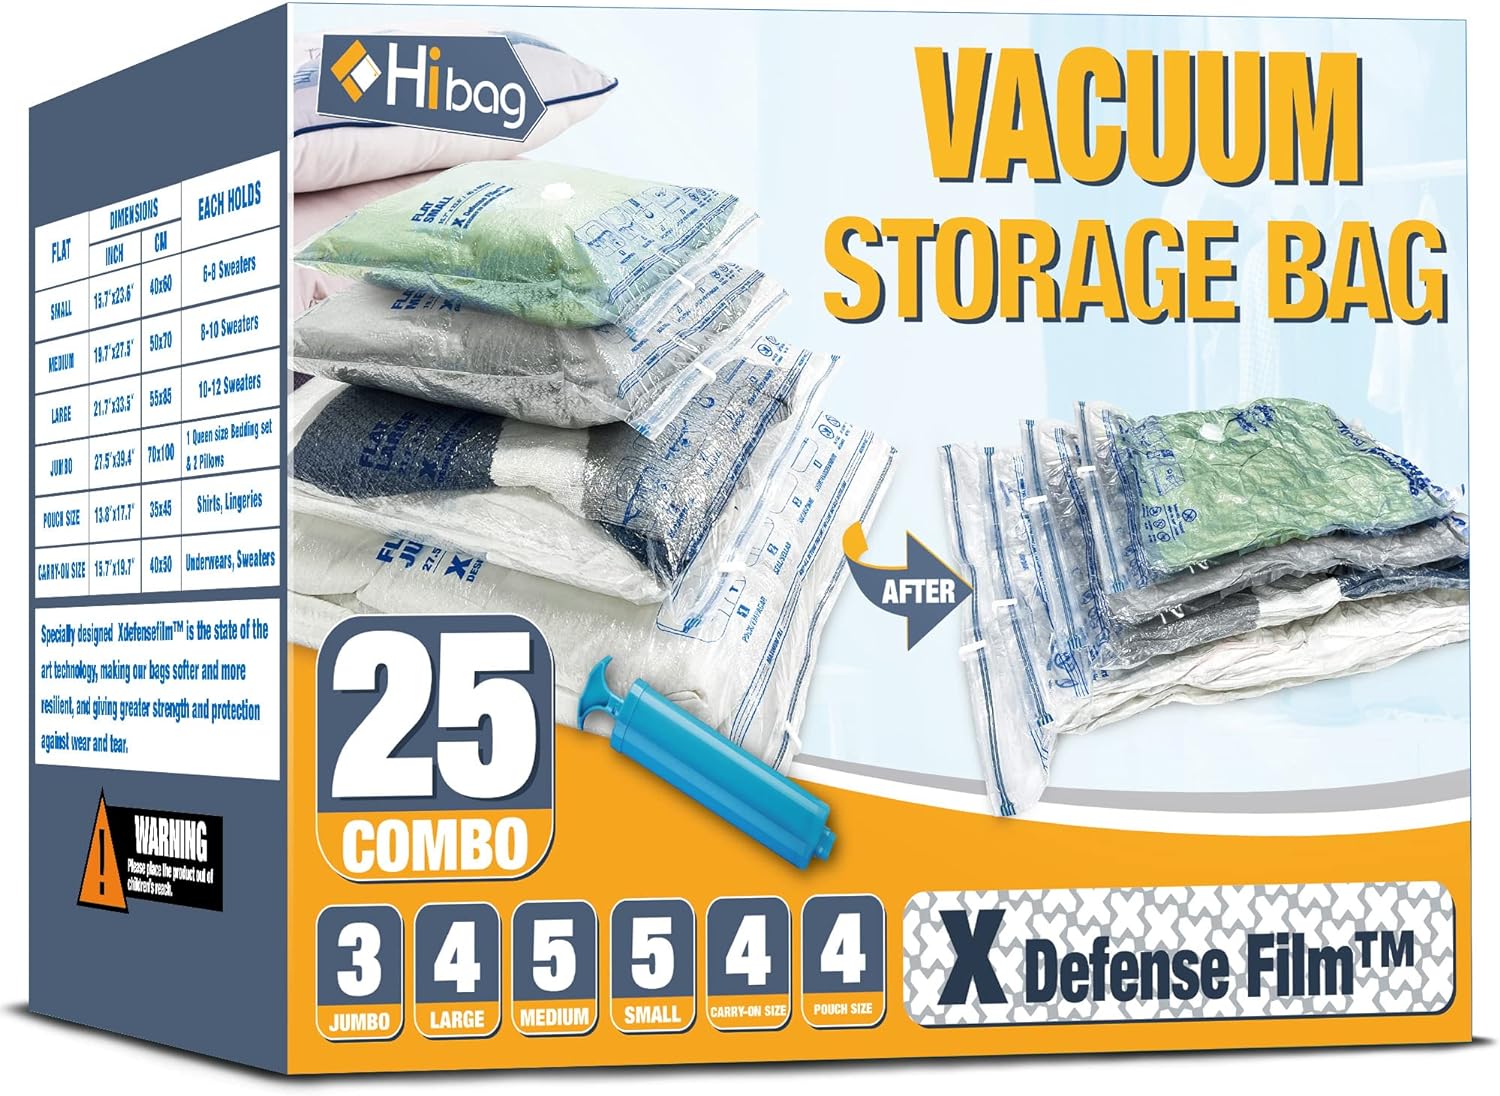 Vacuum Storage Bags, Space Saver Vacuum Seal Storage Bags 25-Pack Sealer Bags for Clothes, Clothing, Bedding, Comforter, Blanket (25C)